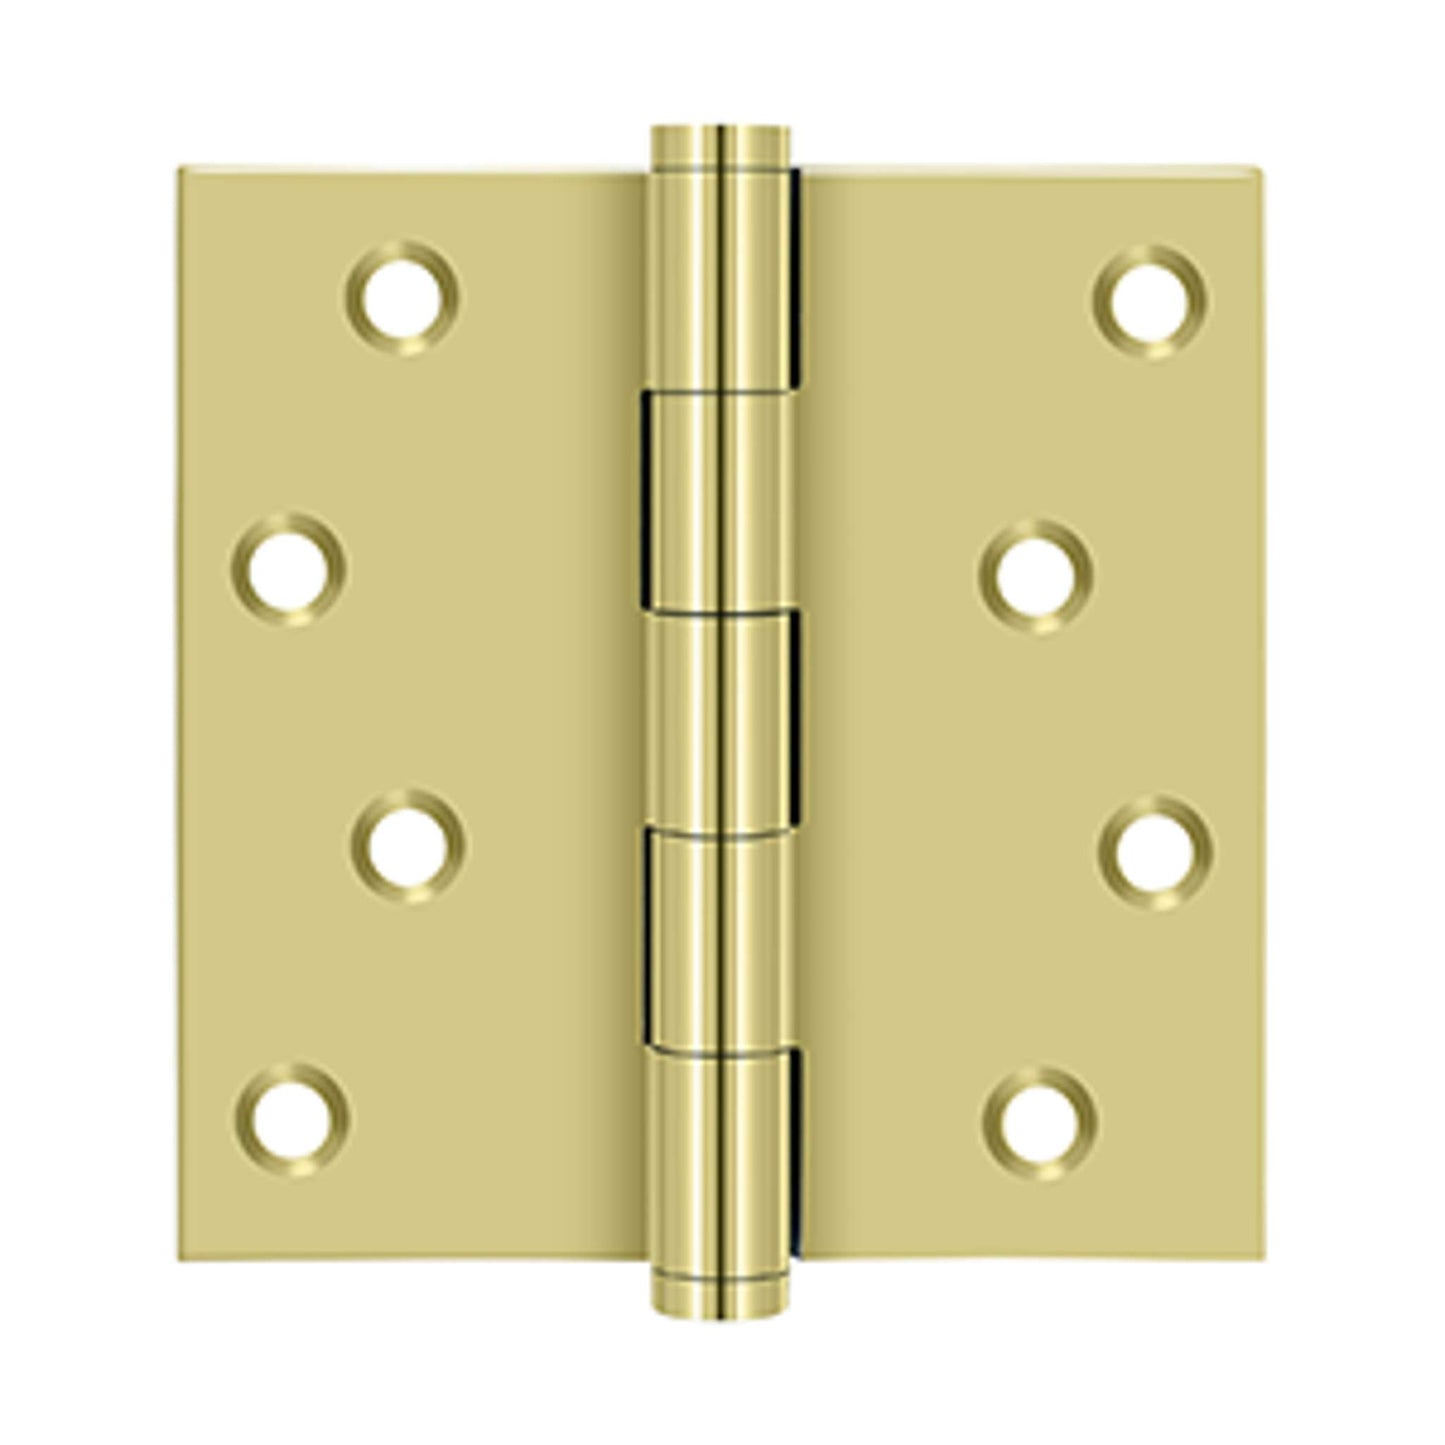 Deltana - 4" x 4" Square Hinges Residential / Zig-Zag, Solid Brass Hinges